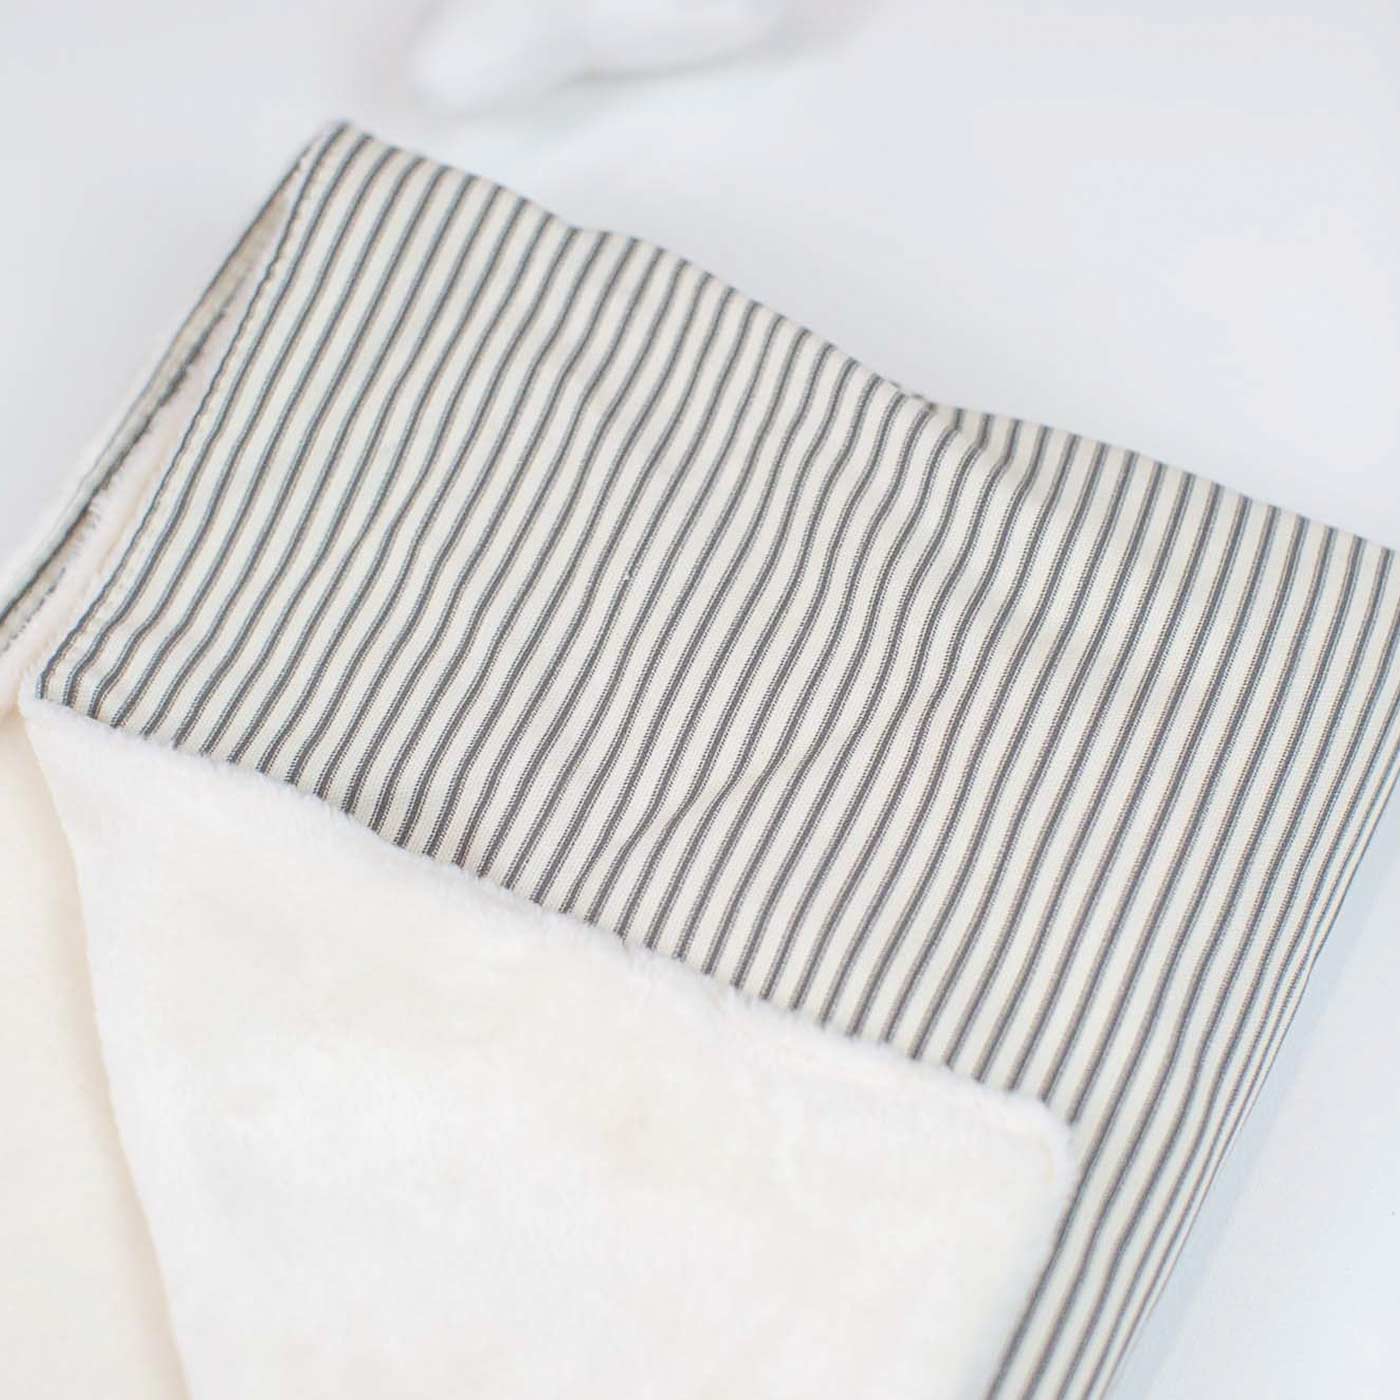  Super Soft Sherpa & Teddy Fleece Lining, Our Luxury Cat & Kitten Blanket In Stunning Regency Stripe I The Perfect Cat Bed Accessory! Available Now at Lords & Labradors